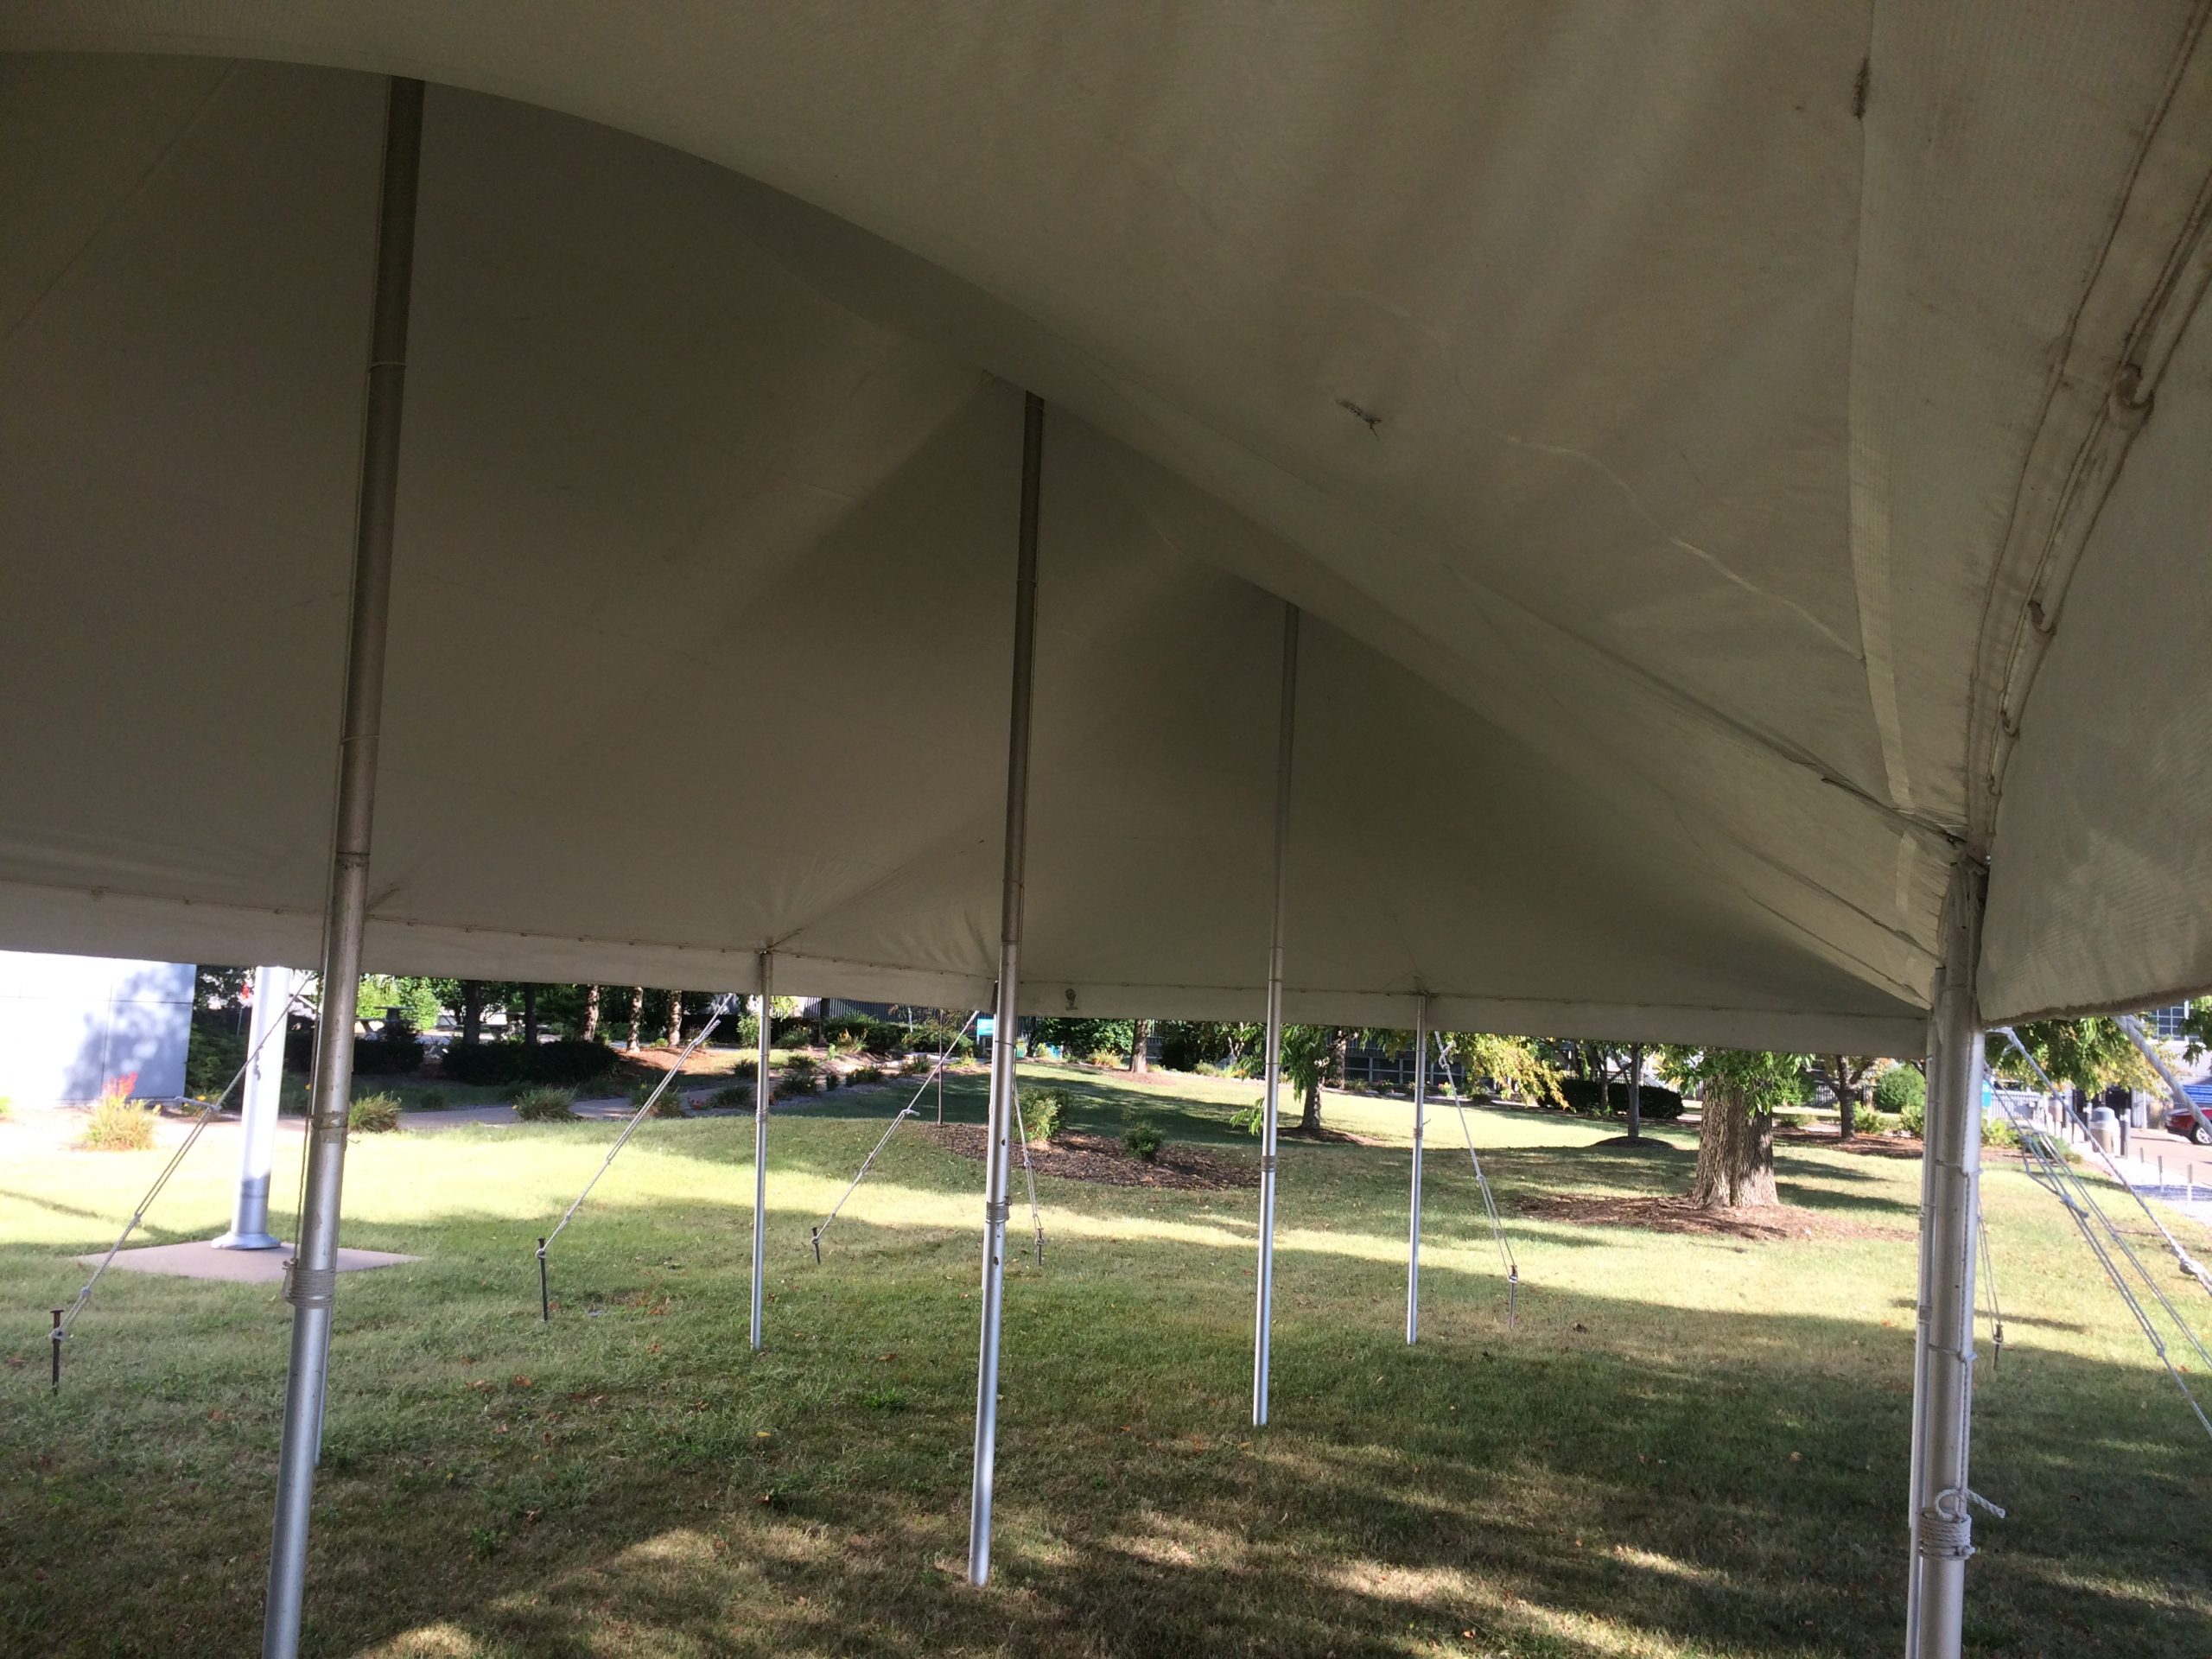 Under 20′ x 40′ rope an pole tent at Alcoa in Bettendorf, Iowa